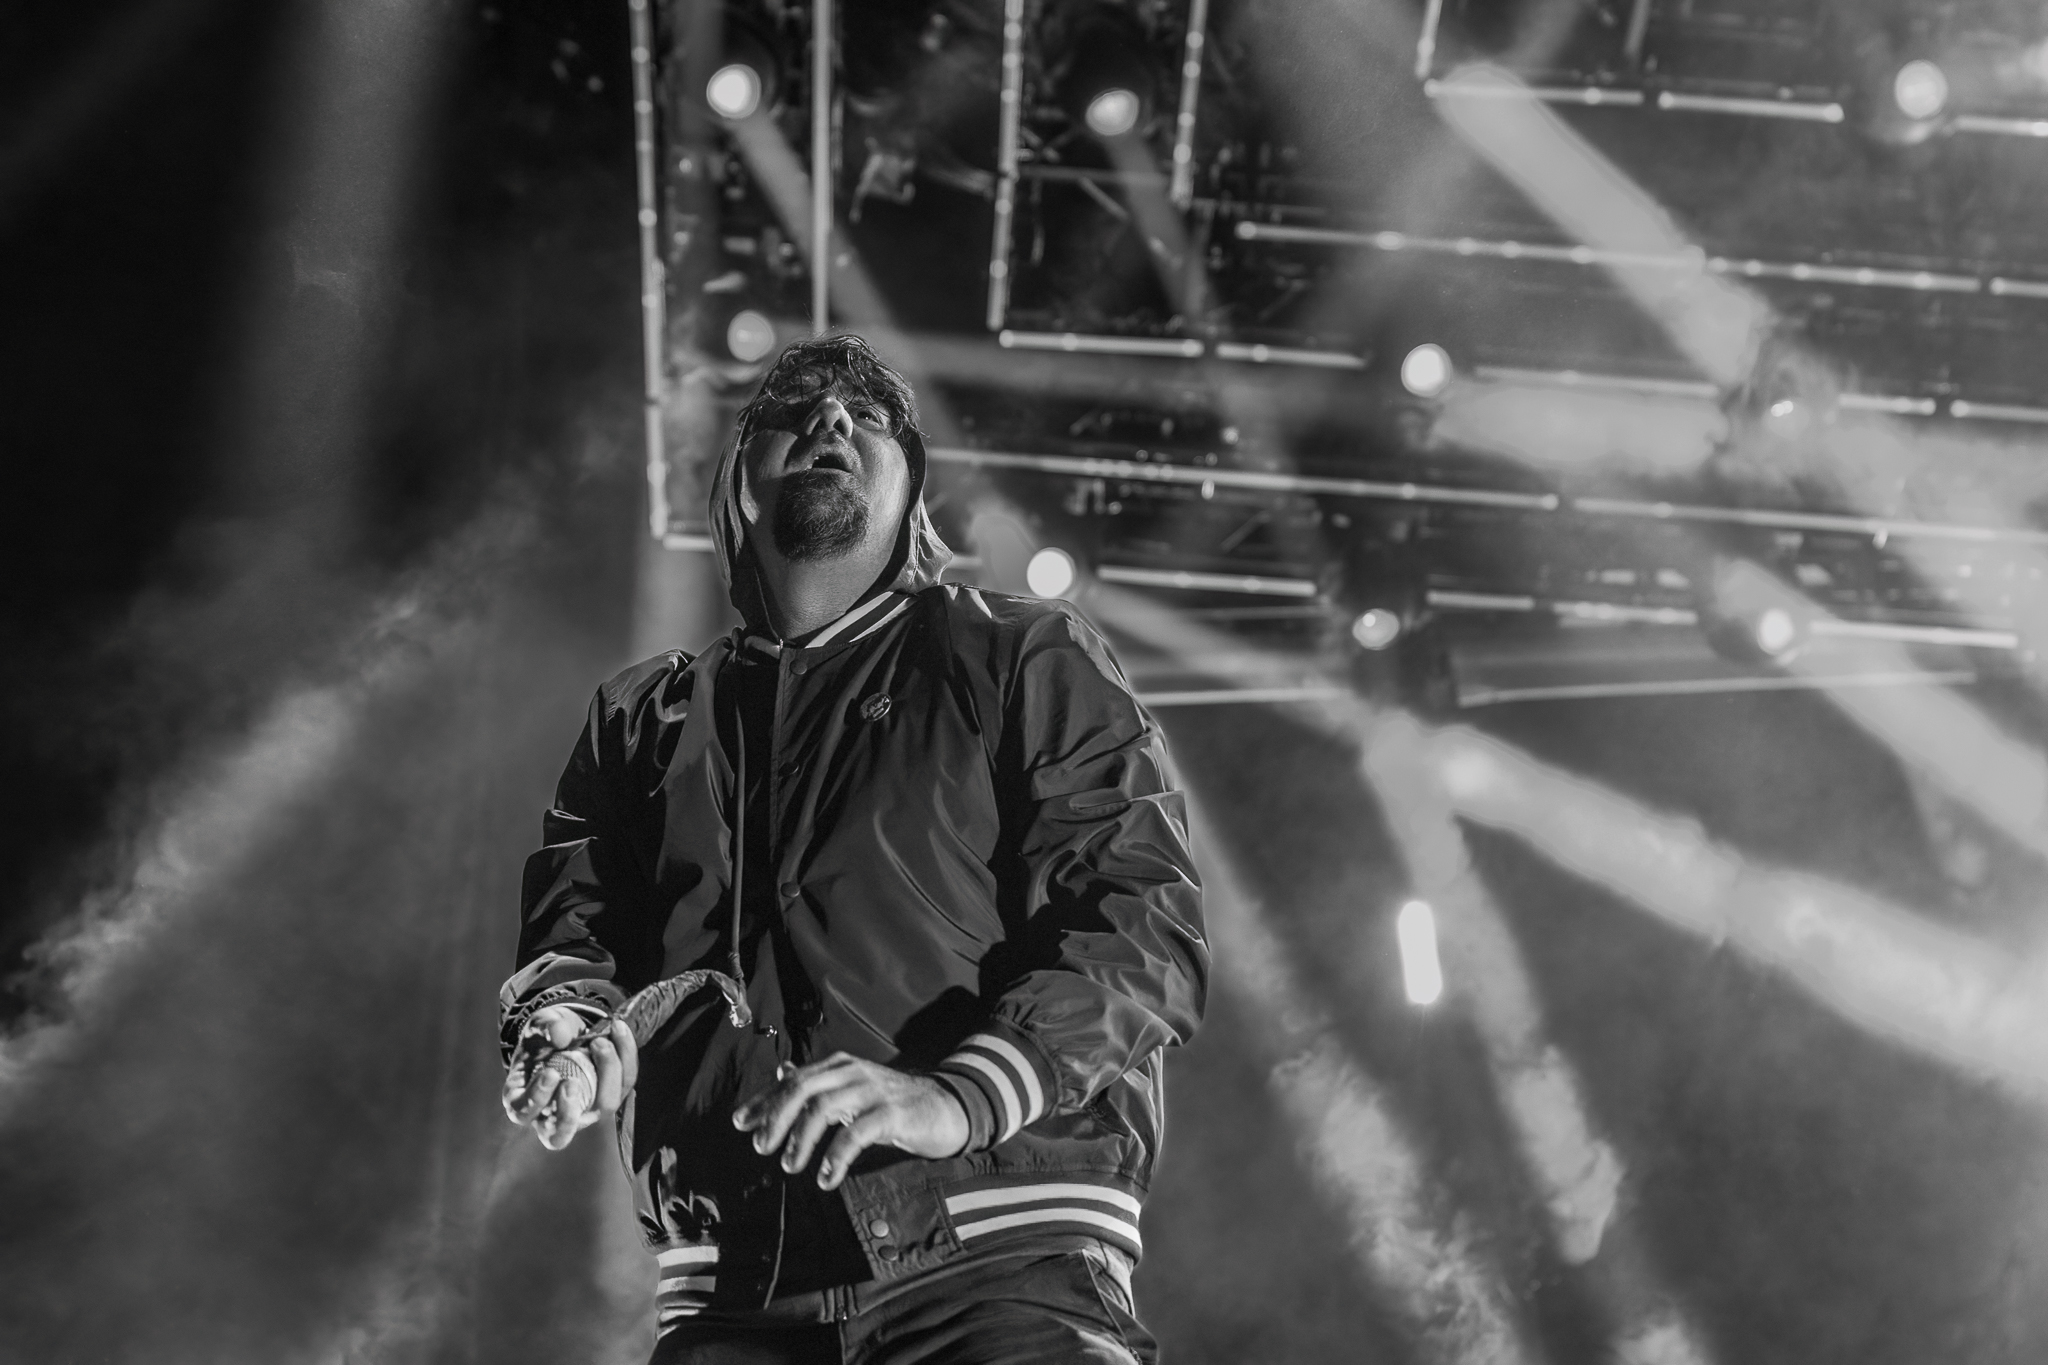 Deftones perform at Moda Center Theater of the Clouds in Portland, OR on April 14, 2022.